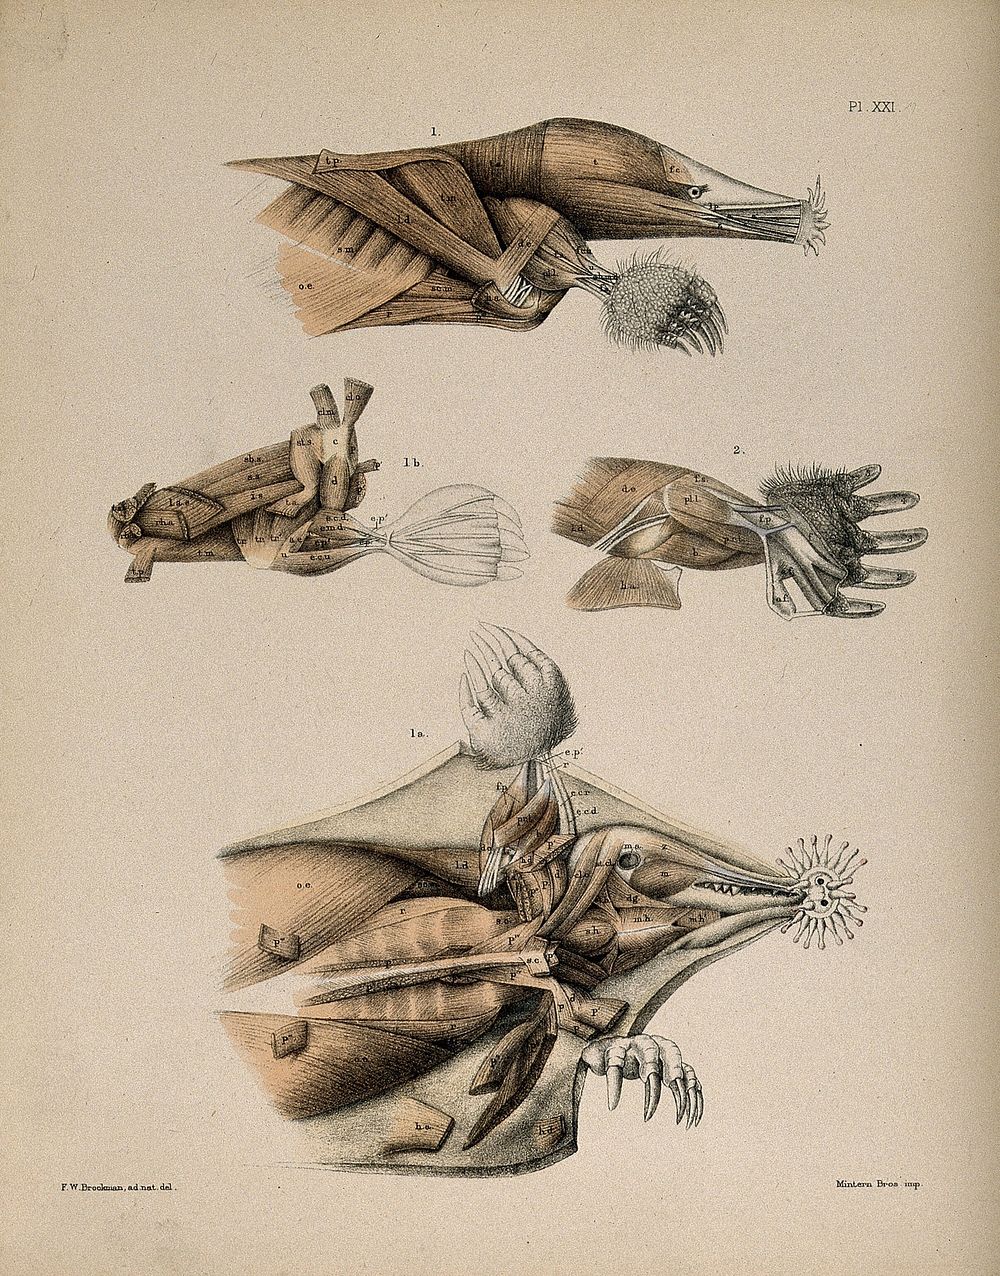 Dissections of a mole: four figures, showing the muscles of the head and limbs. Lithograph by F.W. Brookman, 1880/1900.